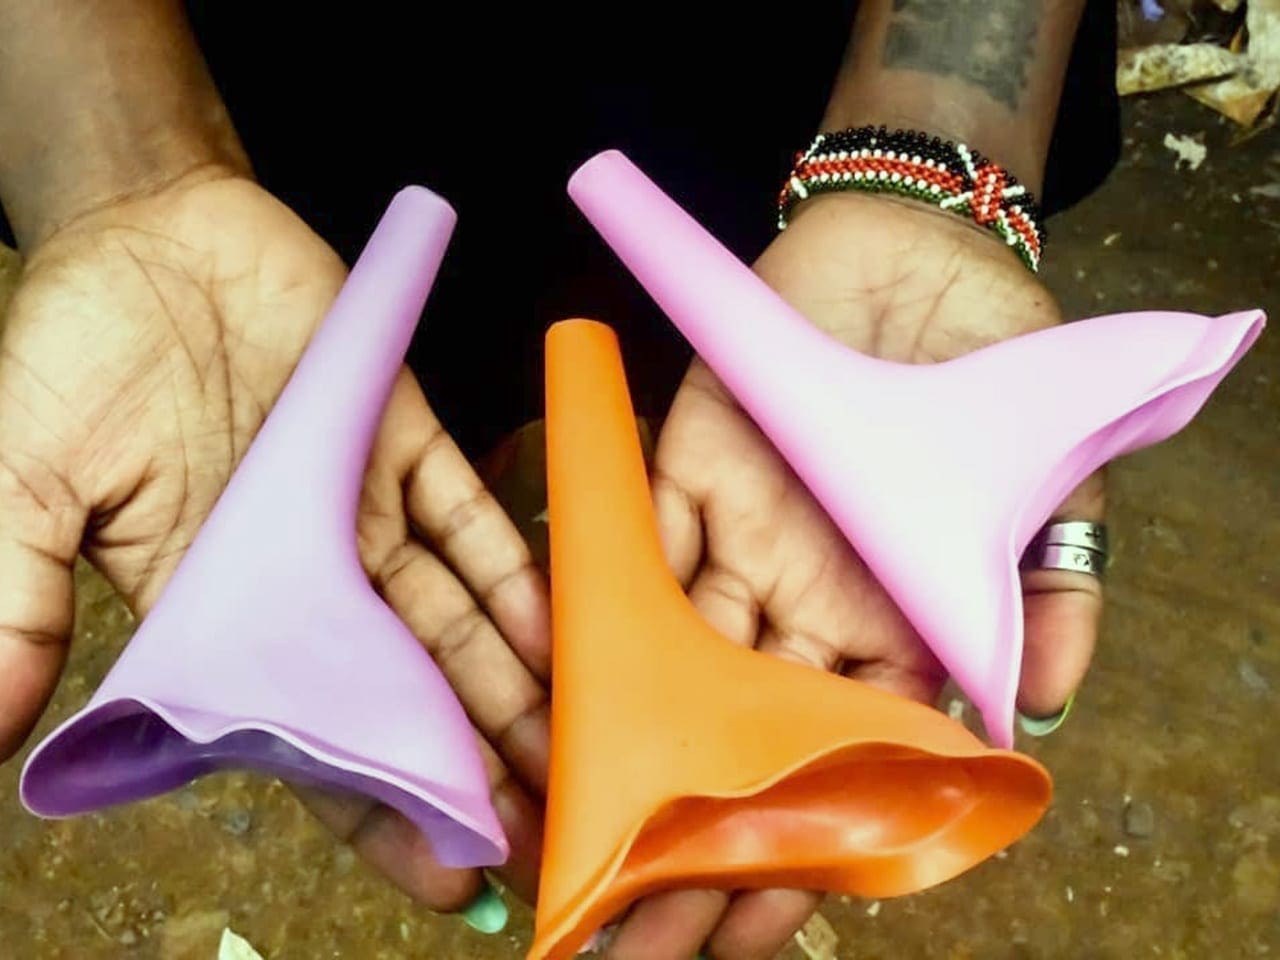 A woman displays three female peeing funnels, two of which are pink while one is orange.